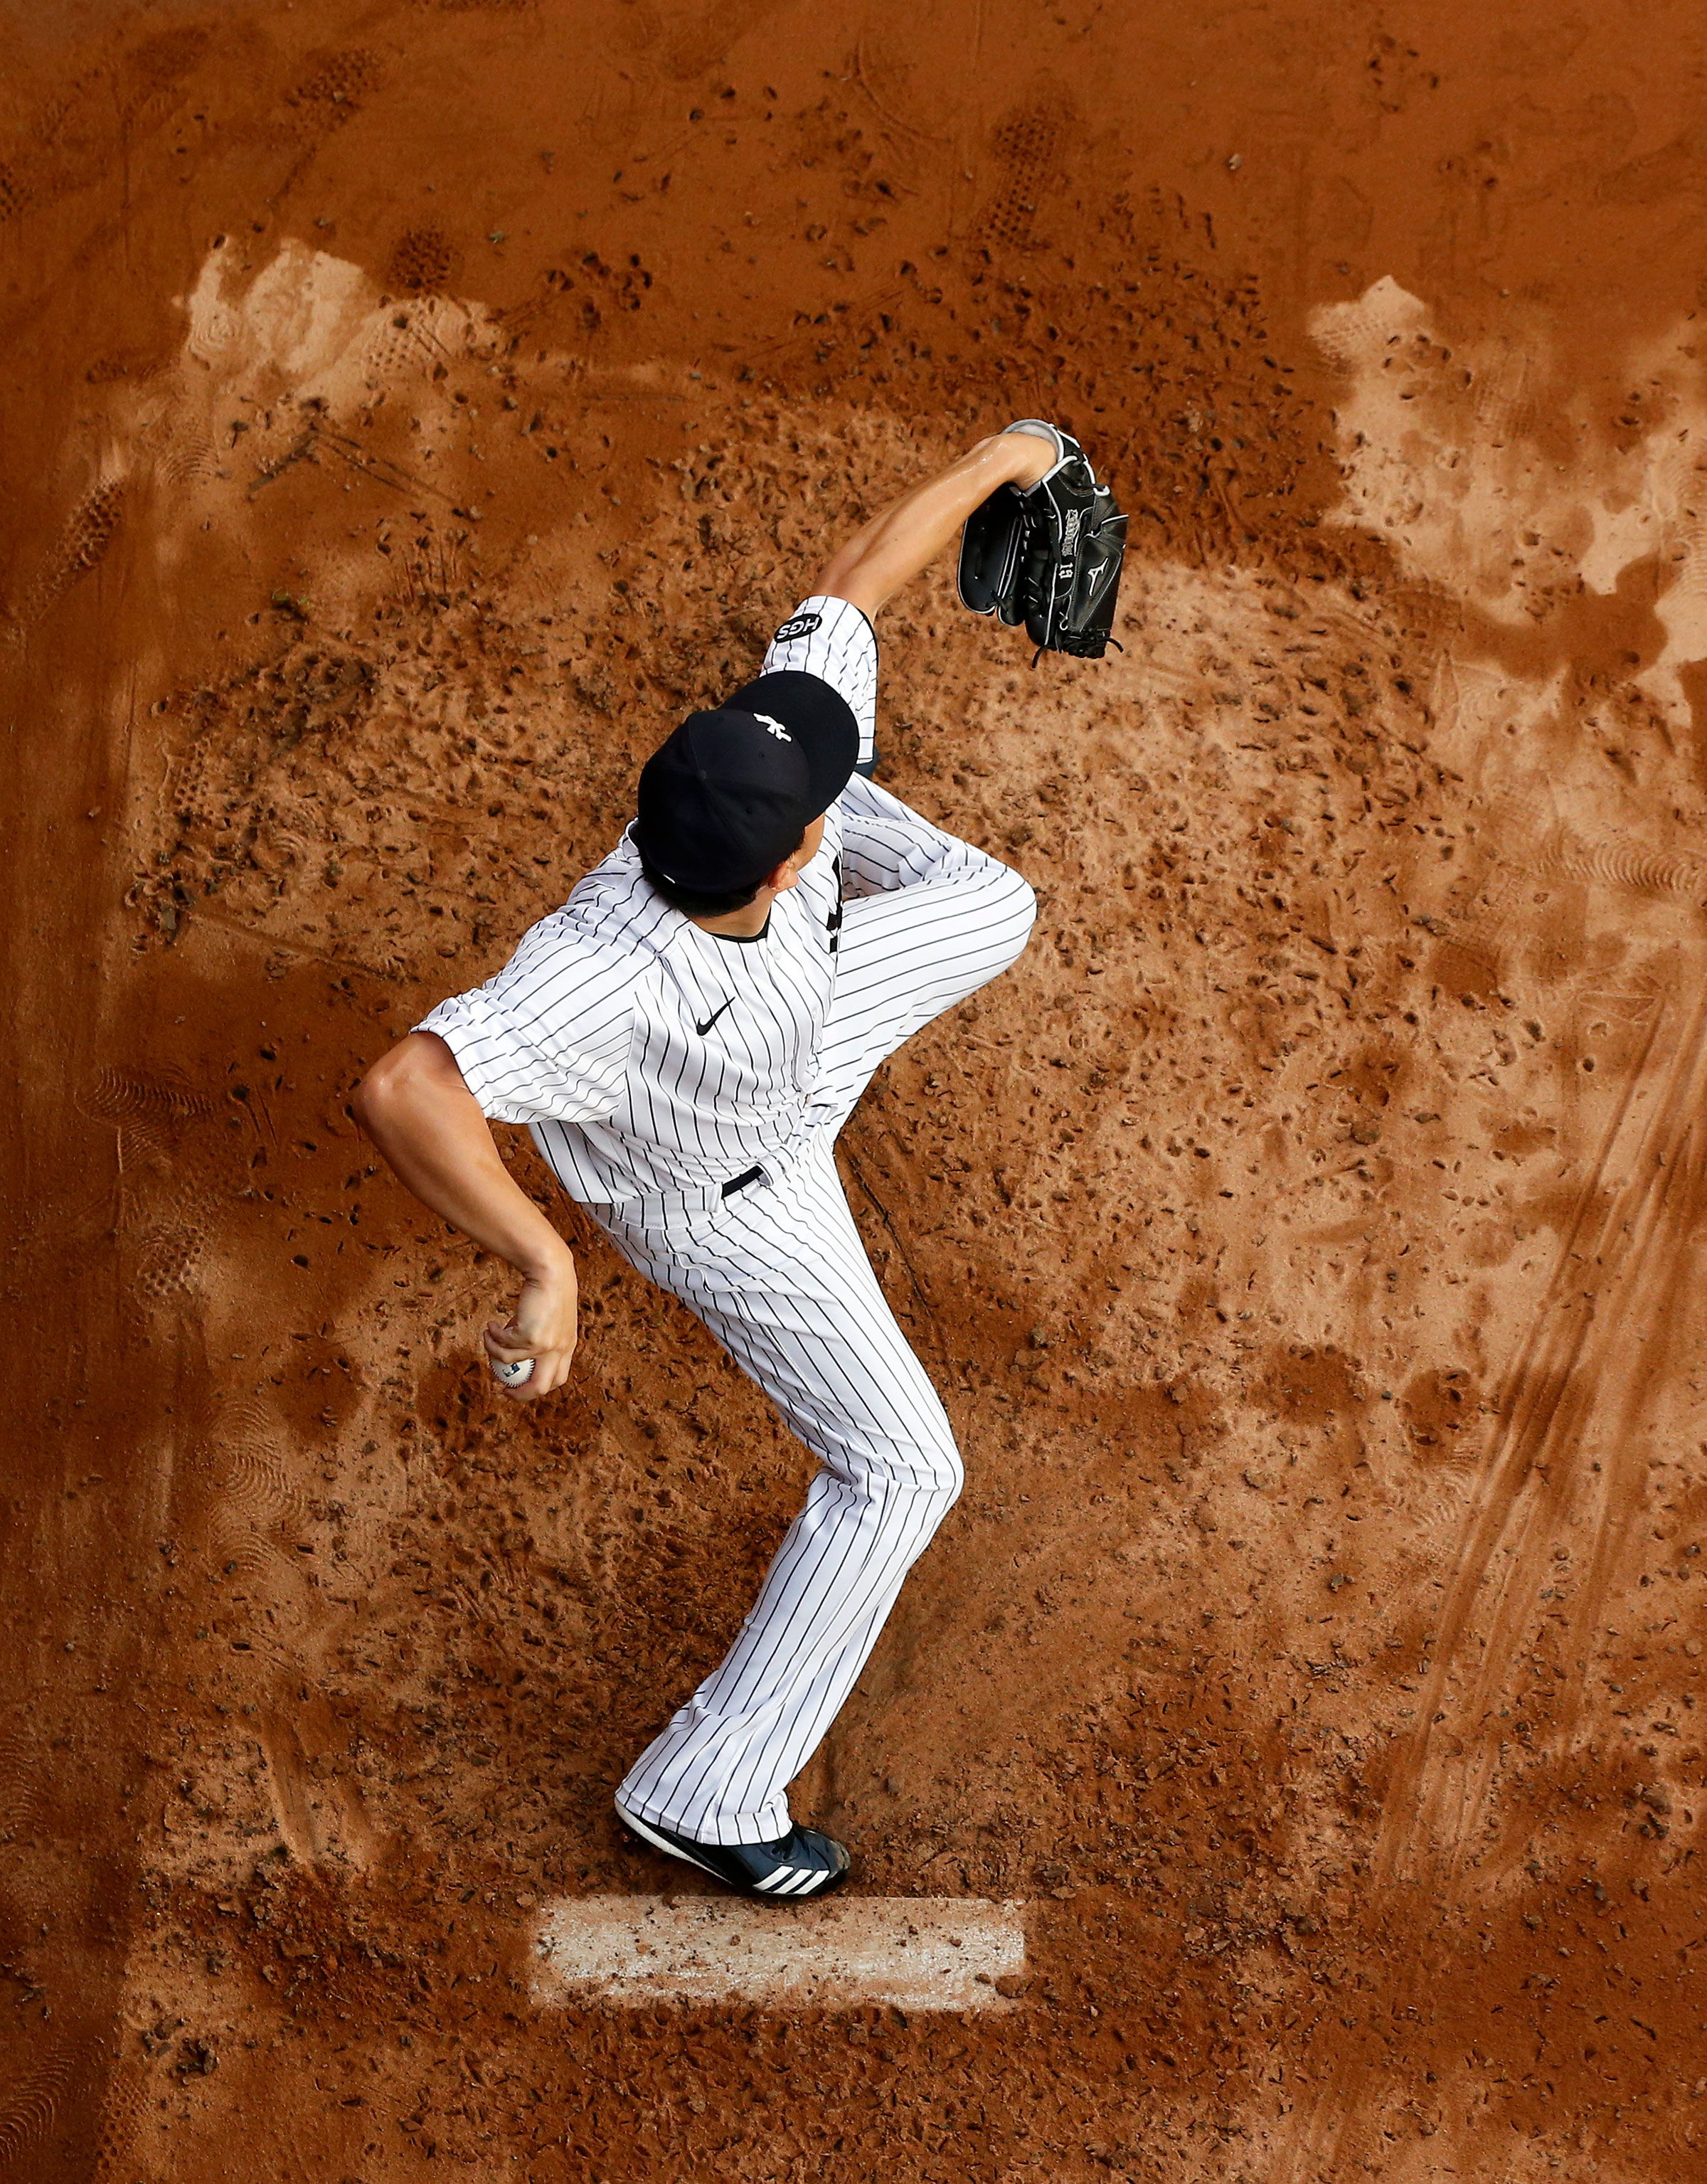 Masahiro Tanaka of the New York Yankees warms up in the bullpen before a game against the Atlanta Braves on August 12, 2020 in New York City.